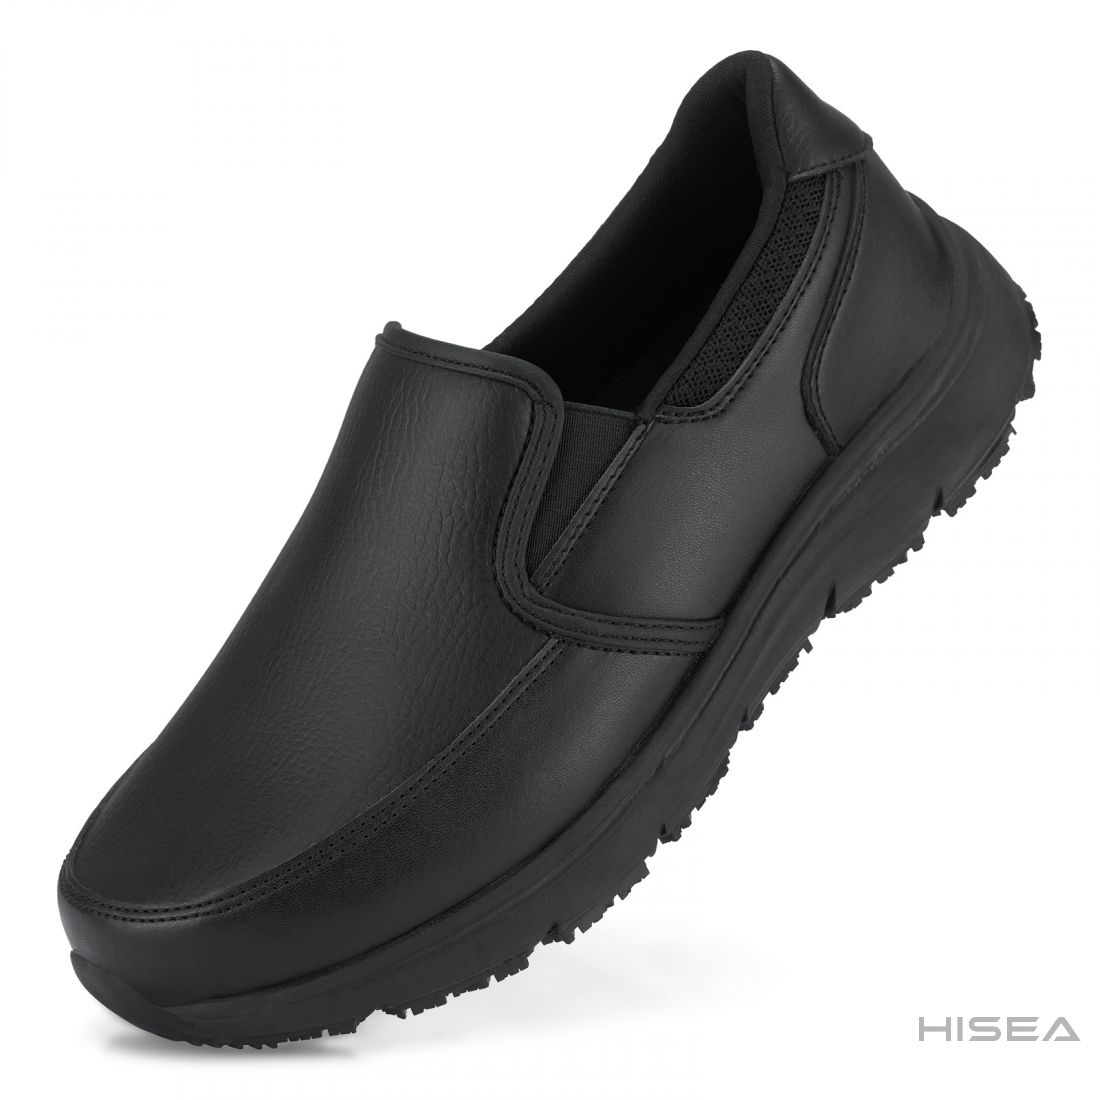 8 shoes for kitchen Mens Professional Nonslip Comfort Work Black Leather Slip on Shoe Water and Oil Resistant 